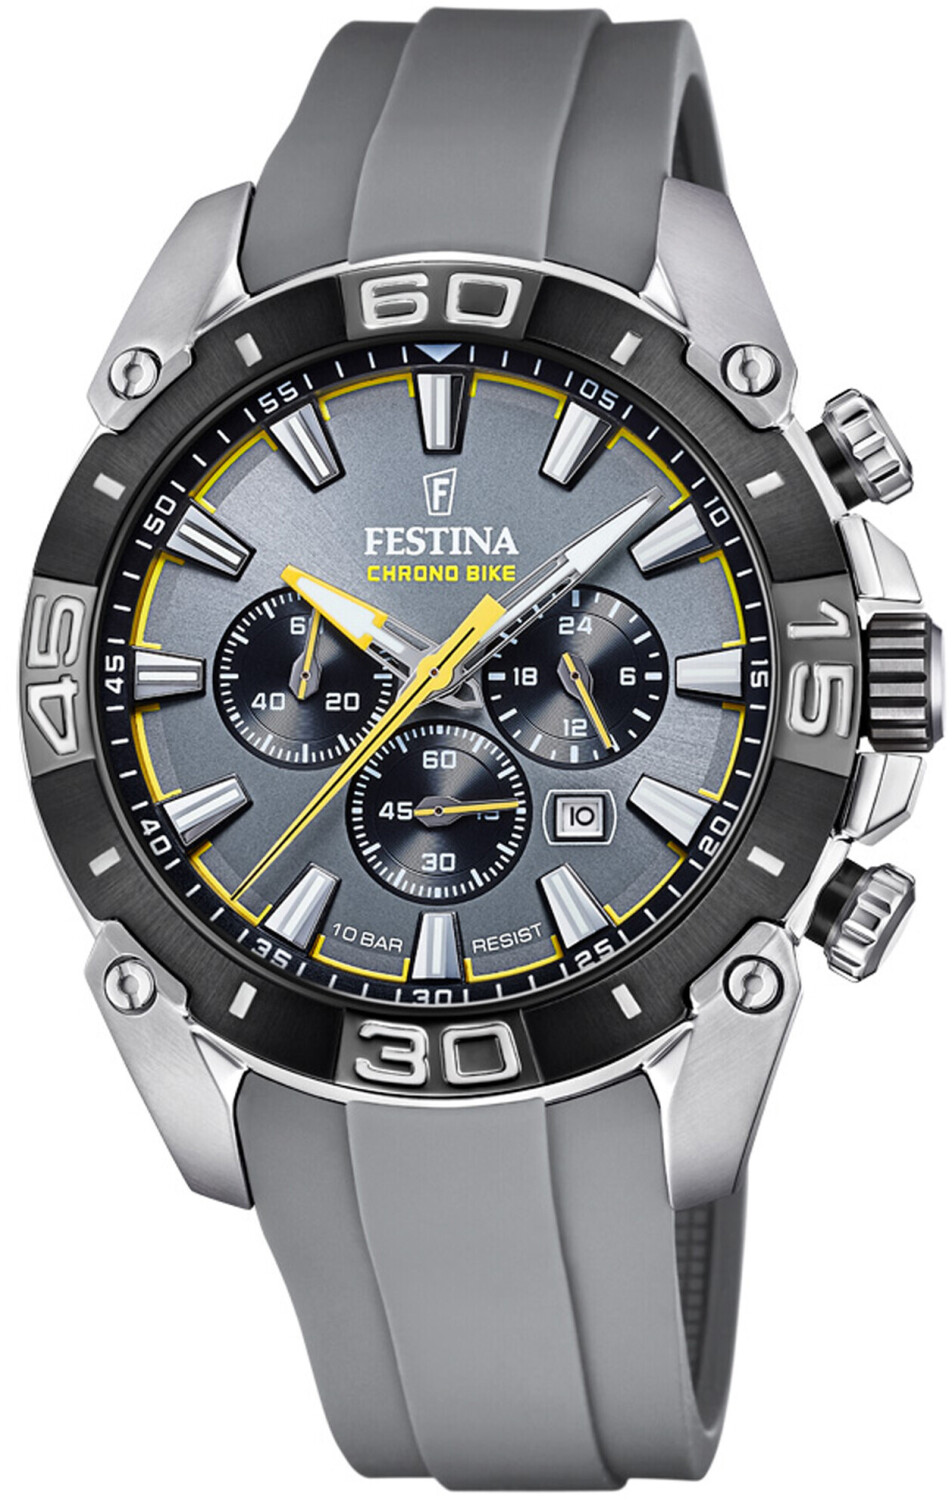 Buy Festina Chrono Bike F20544 from £152.00 (Today) – Best Deals on